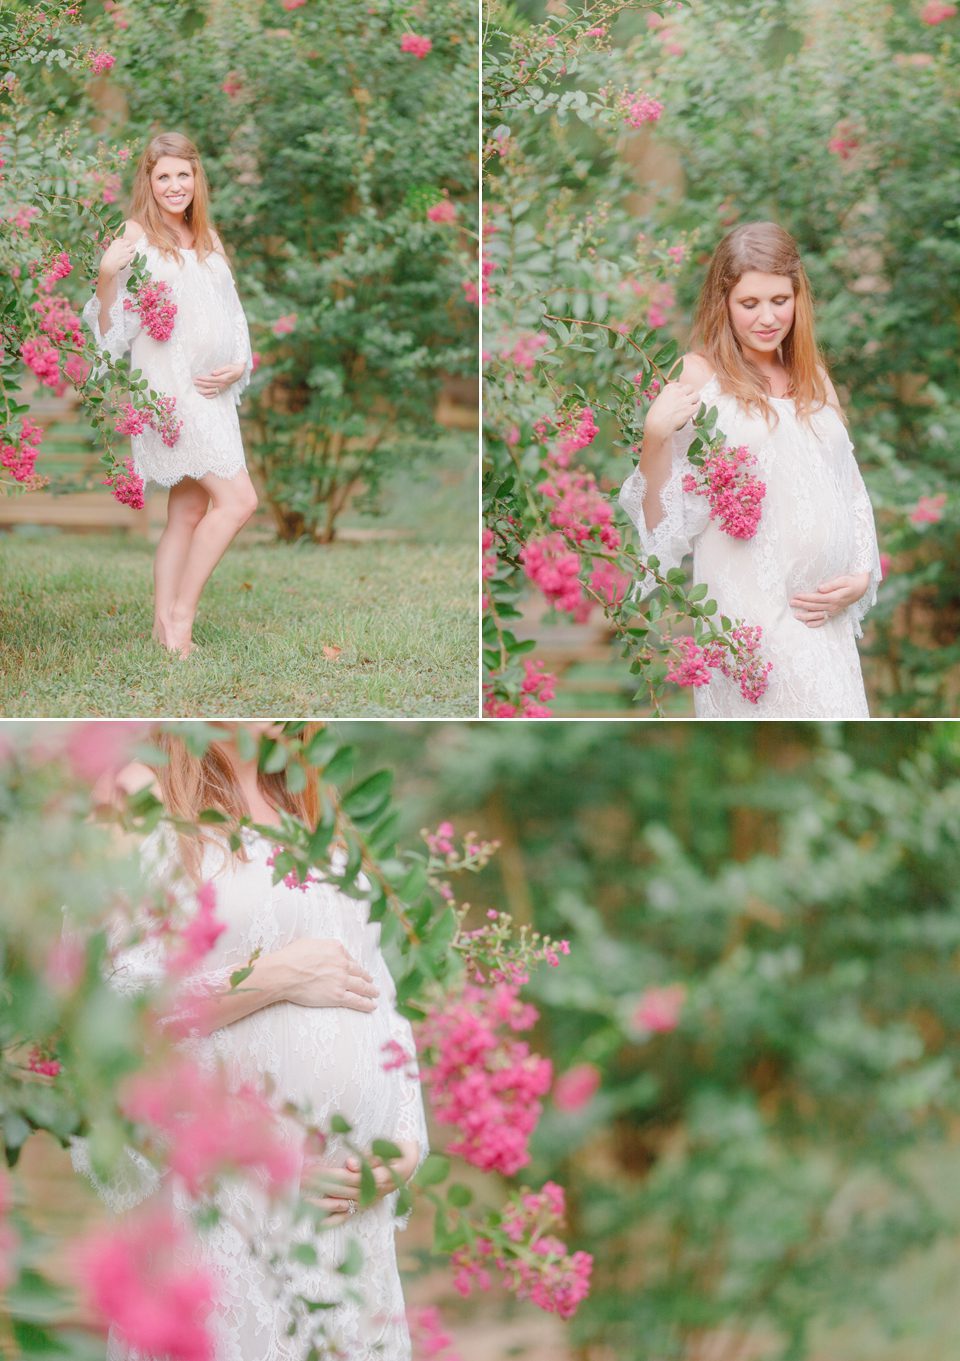 Athens, GA outdoor maternity photography surrounded by summer flowering trees.